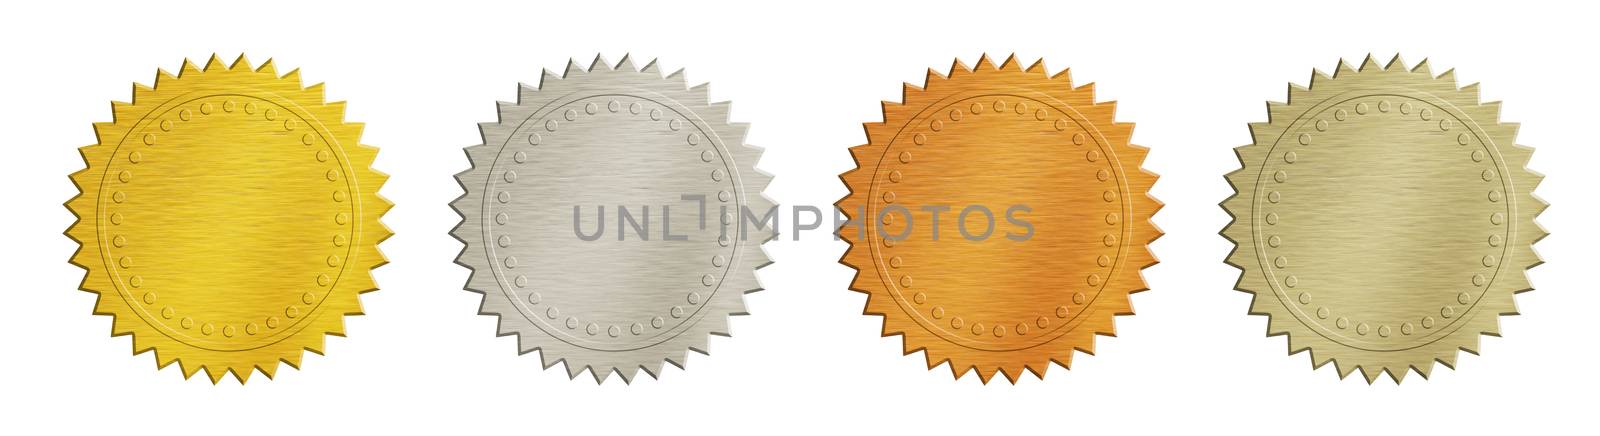 Close up brushed metal achievement and award badges (golden, silver, copper and bronze) isolated on white background